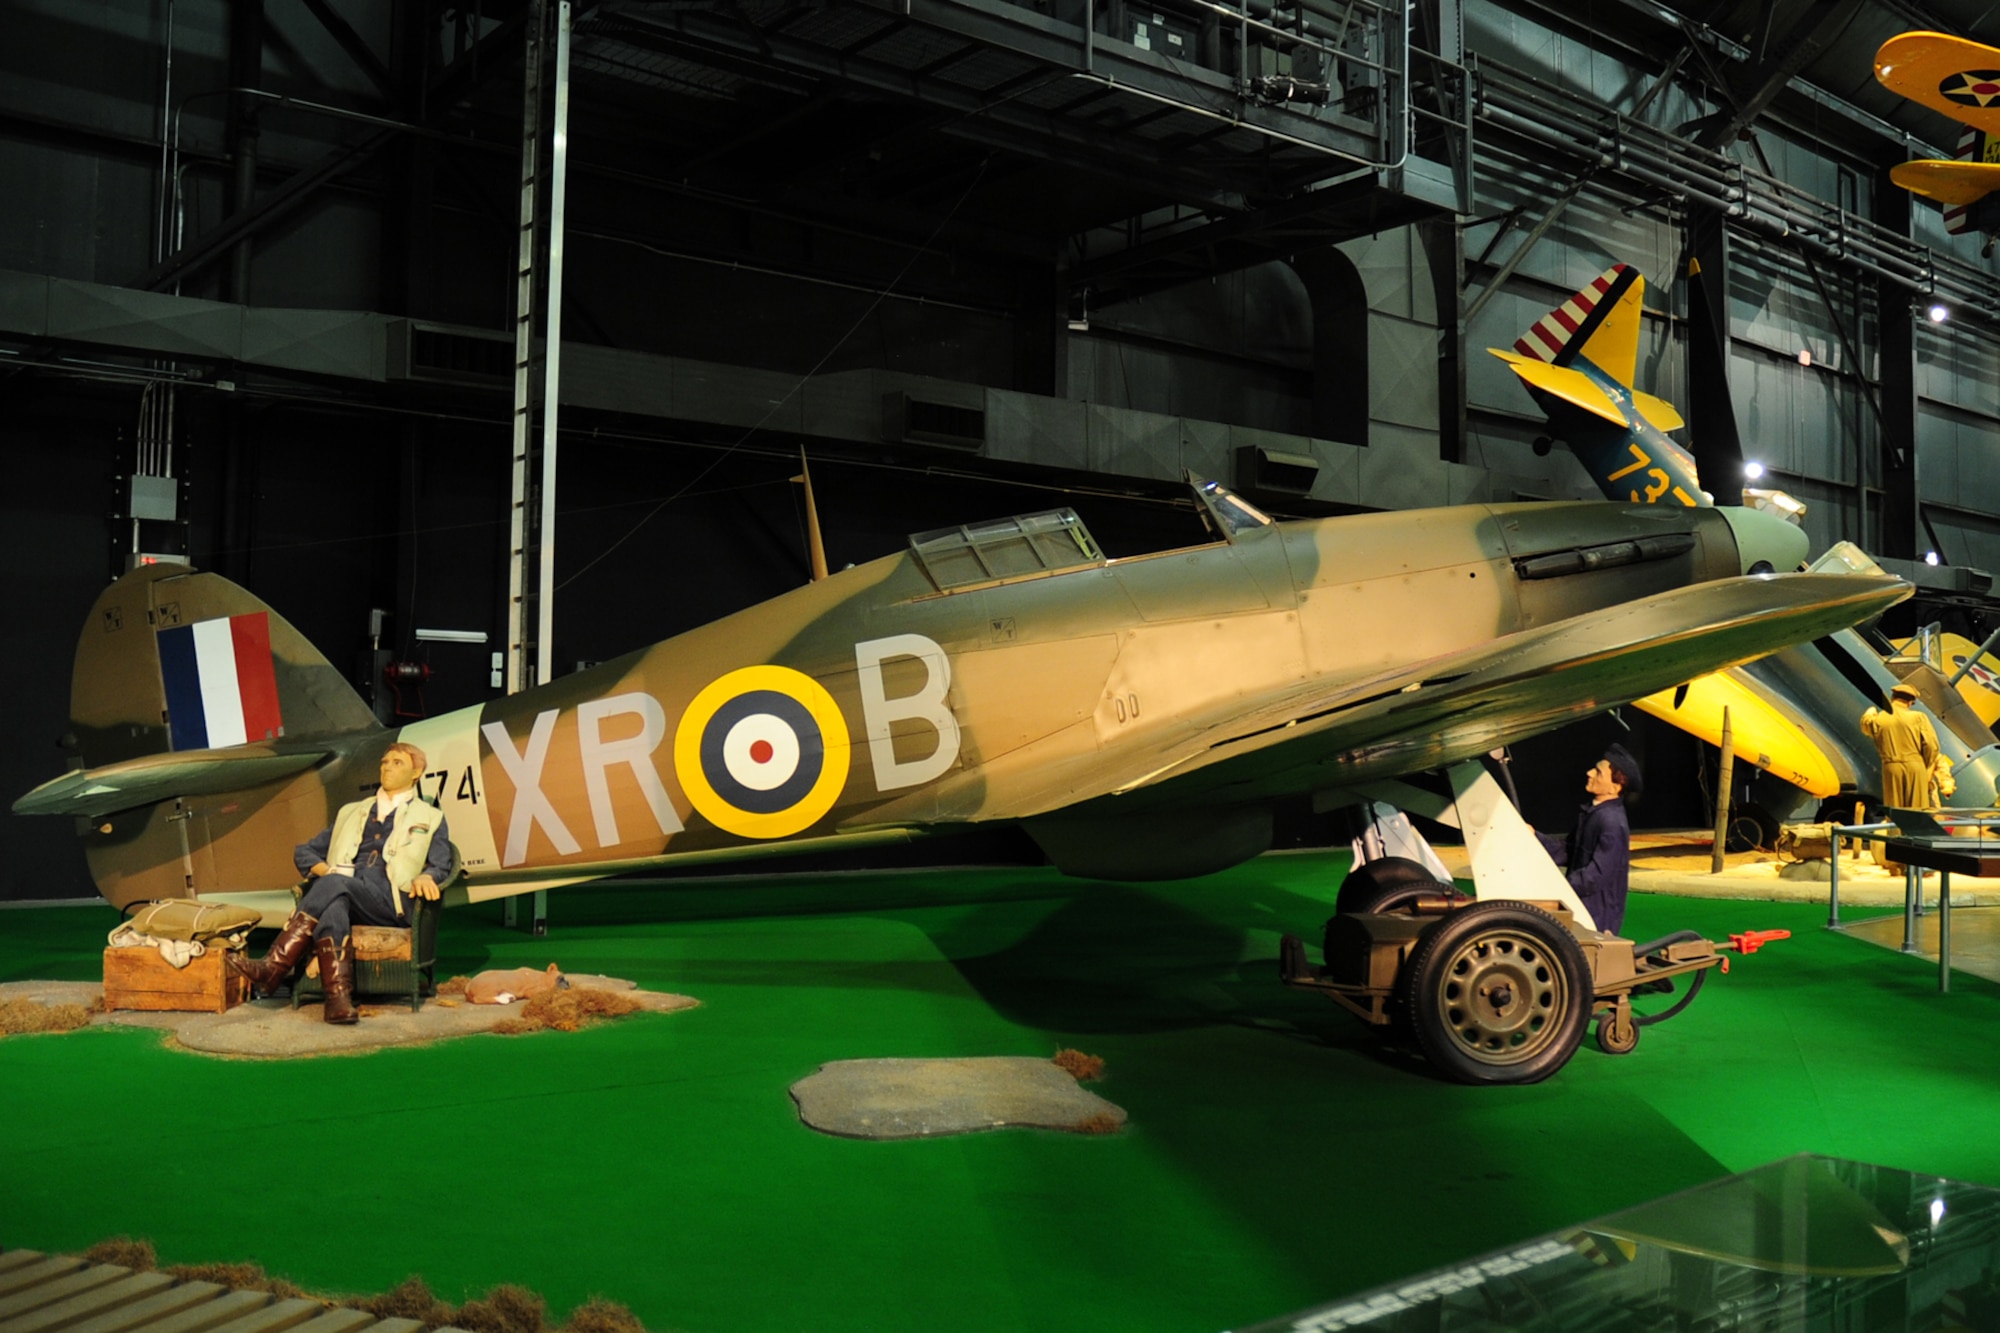 DAYTON, Ohio -- Hawker Hurricane diorama in the Early Years Gallery at the National Museum of the United States Air Force. (U.S. Air Force photo)